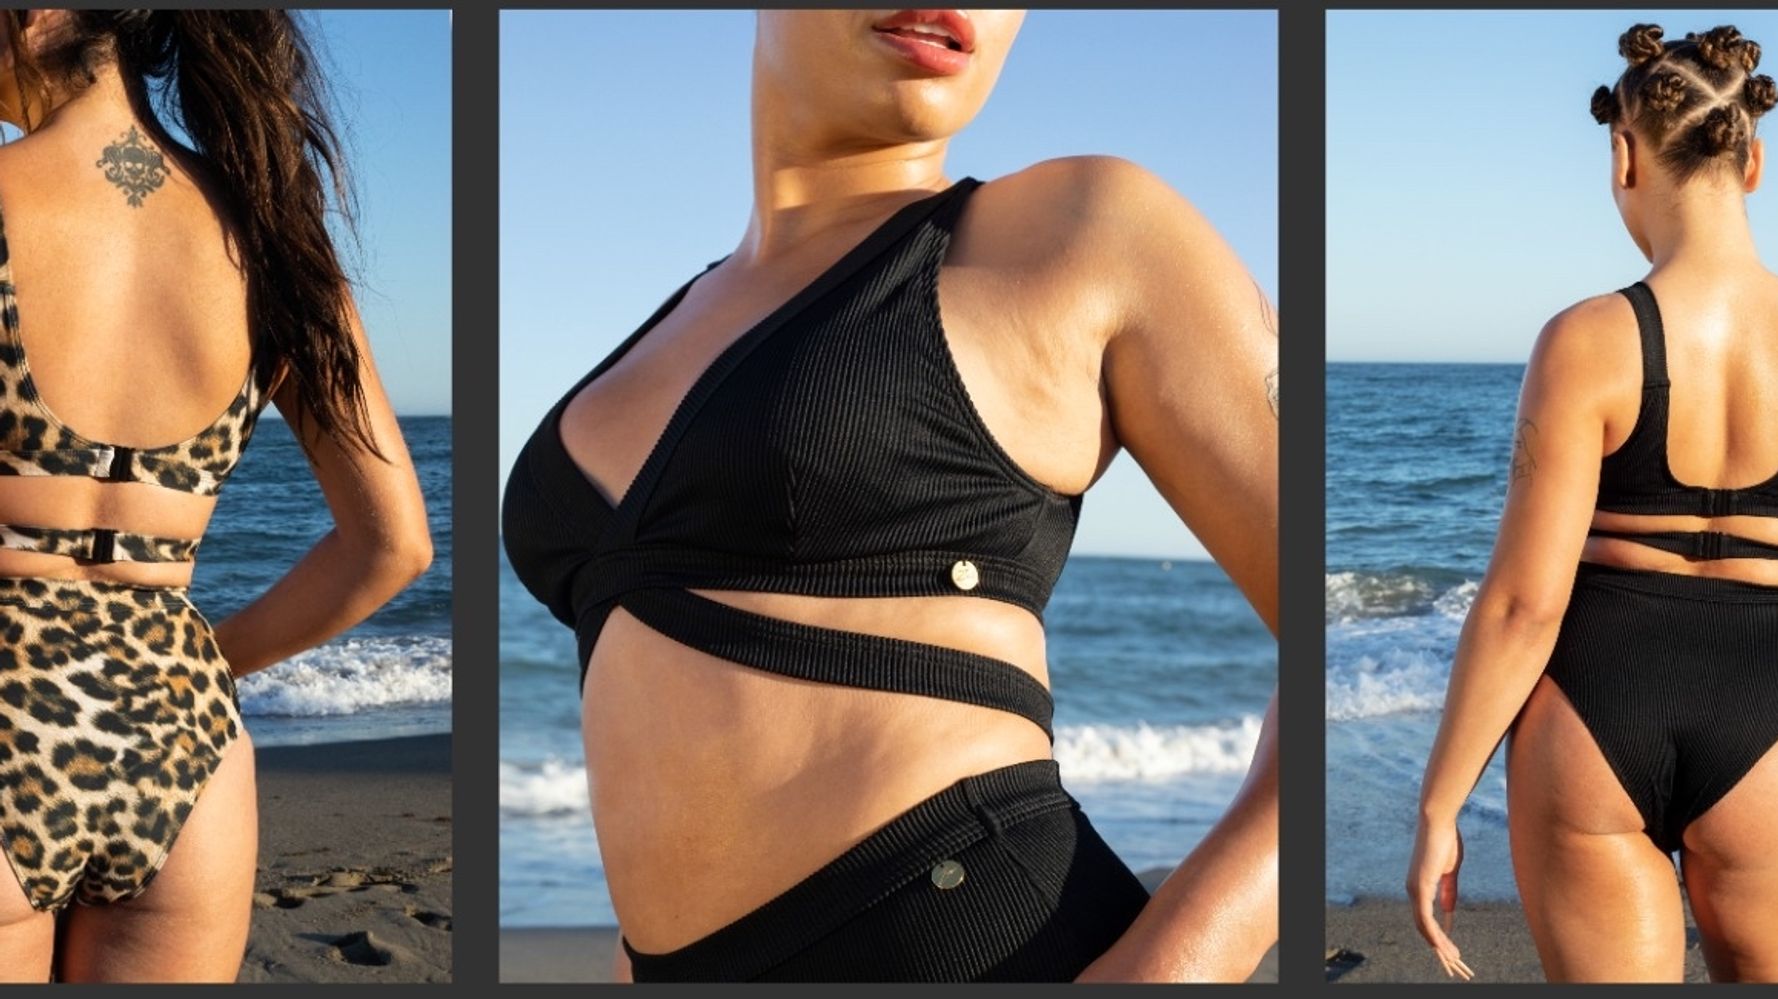 The UK's First Tucking Swimwear Is Here To Empower Trans Women This Summer